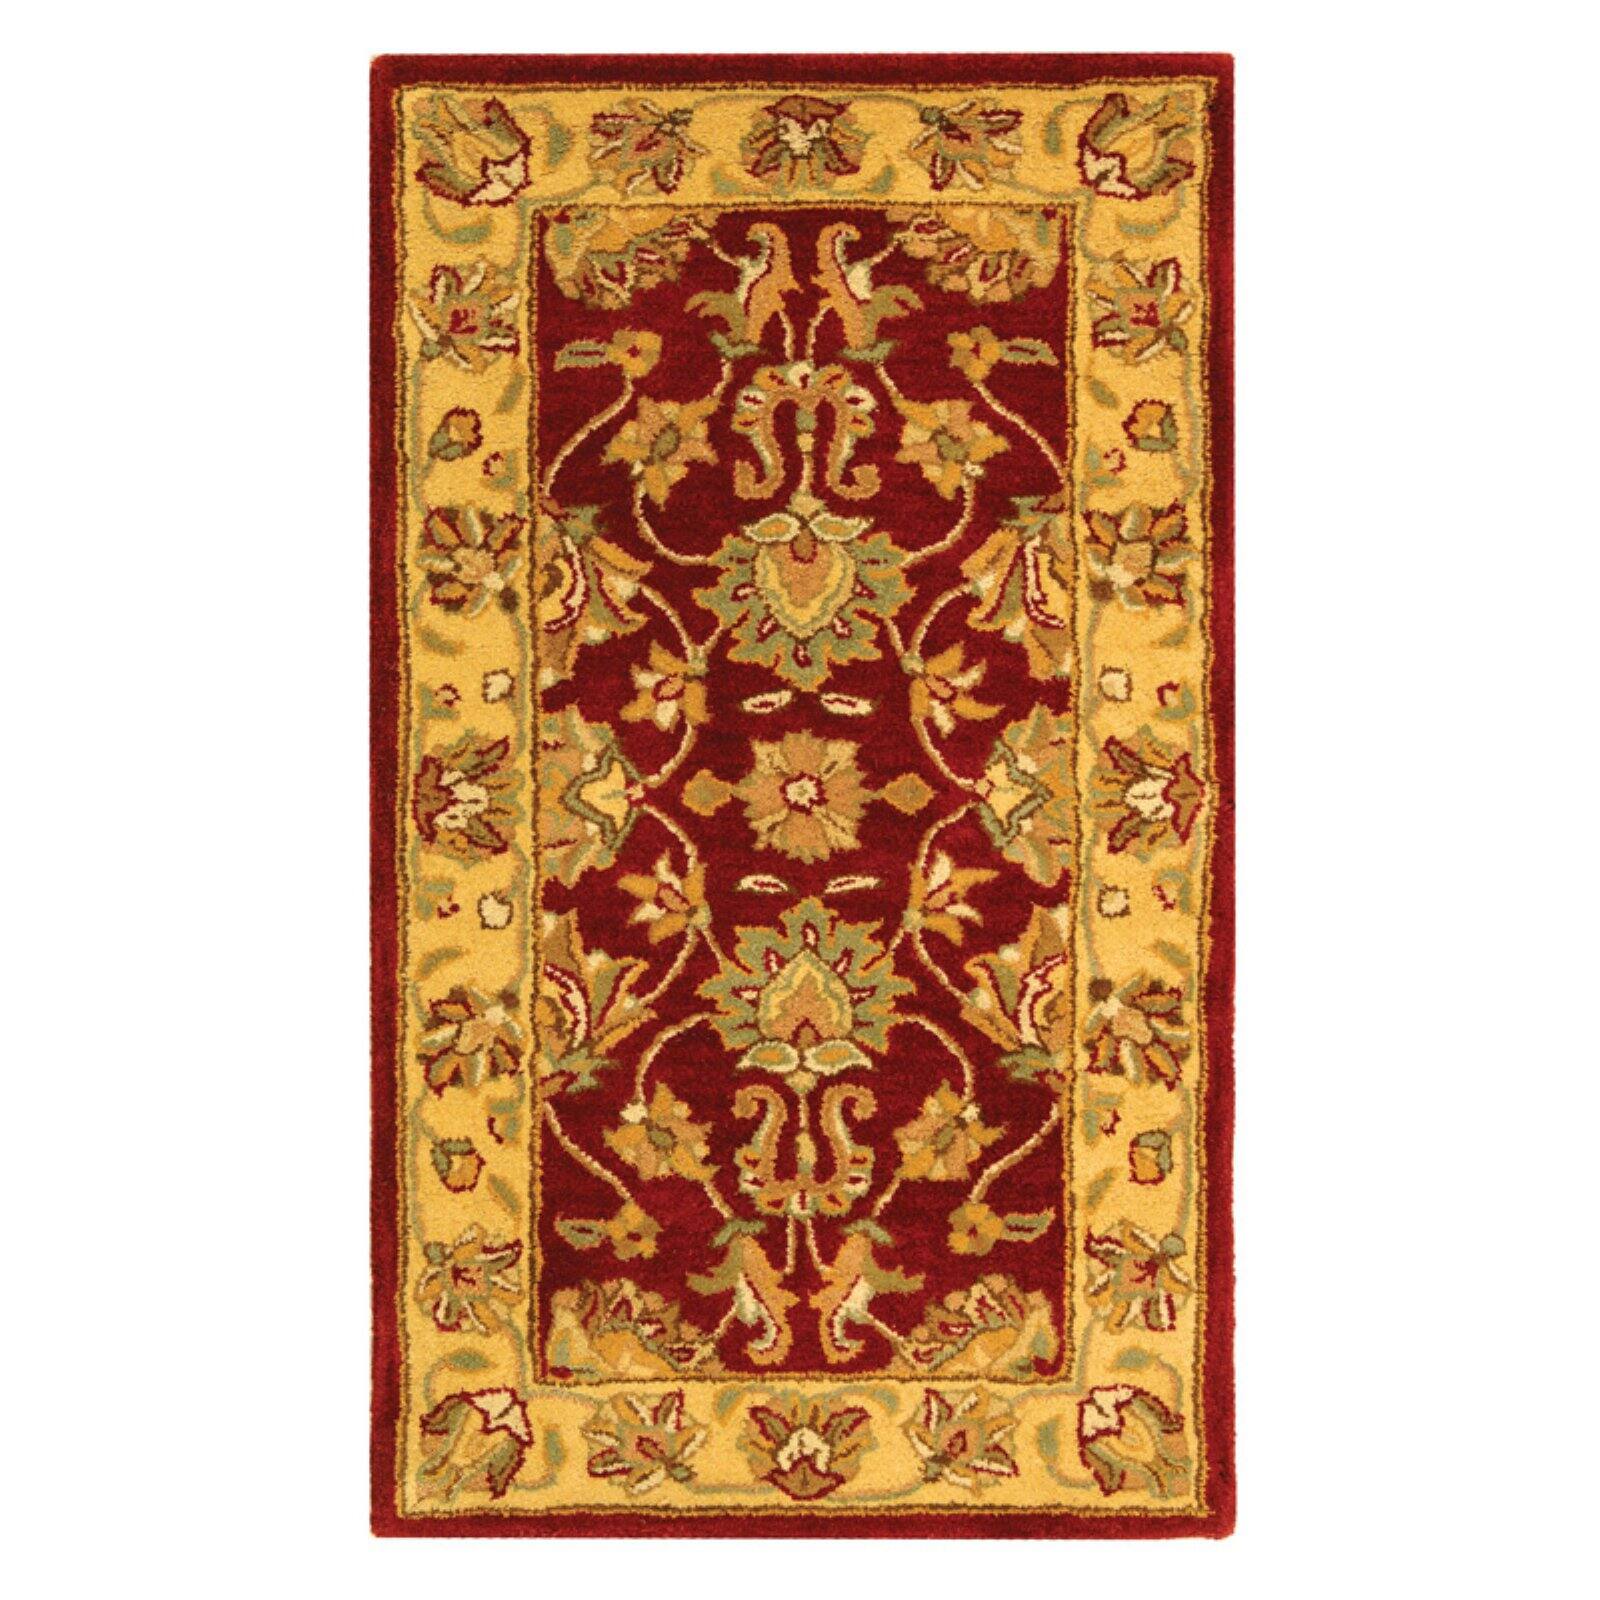 SAFAVIEH Heritage Regis Traditional Wool Area Rug, Red/Gold, 6' x 9' - image 2 of 9